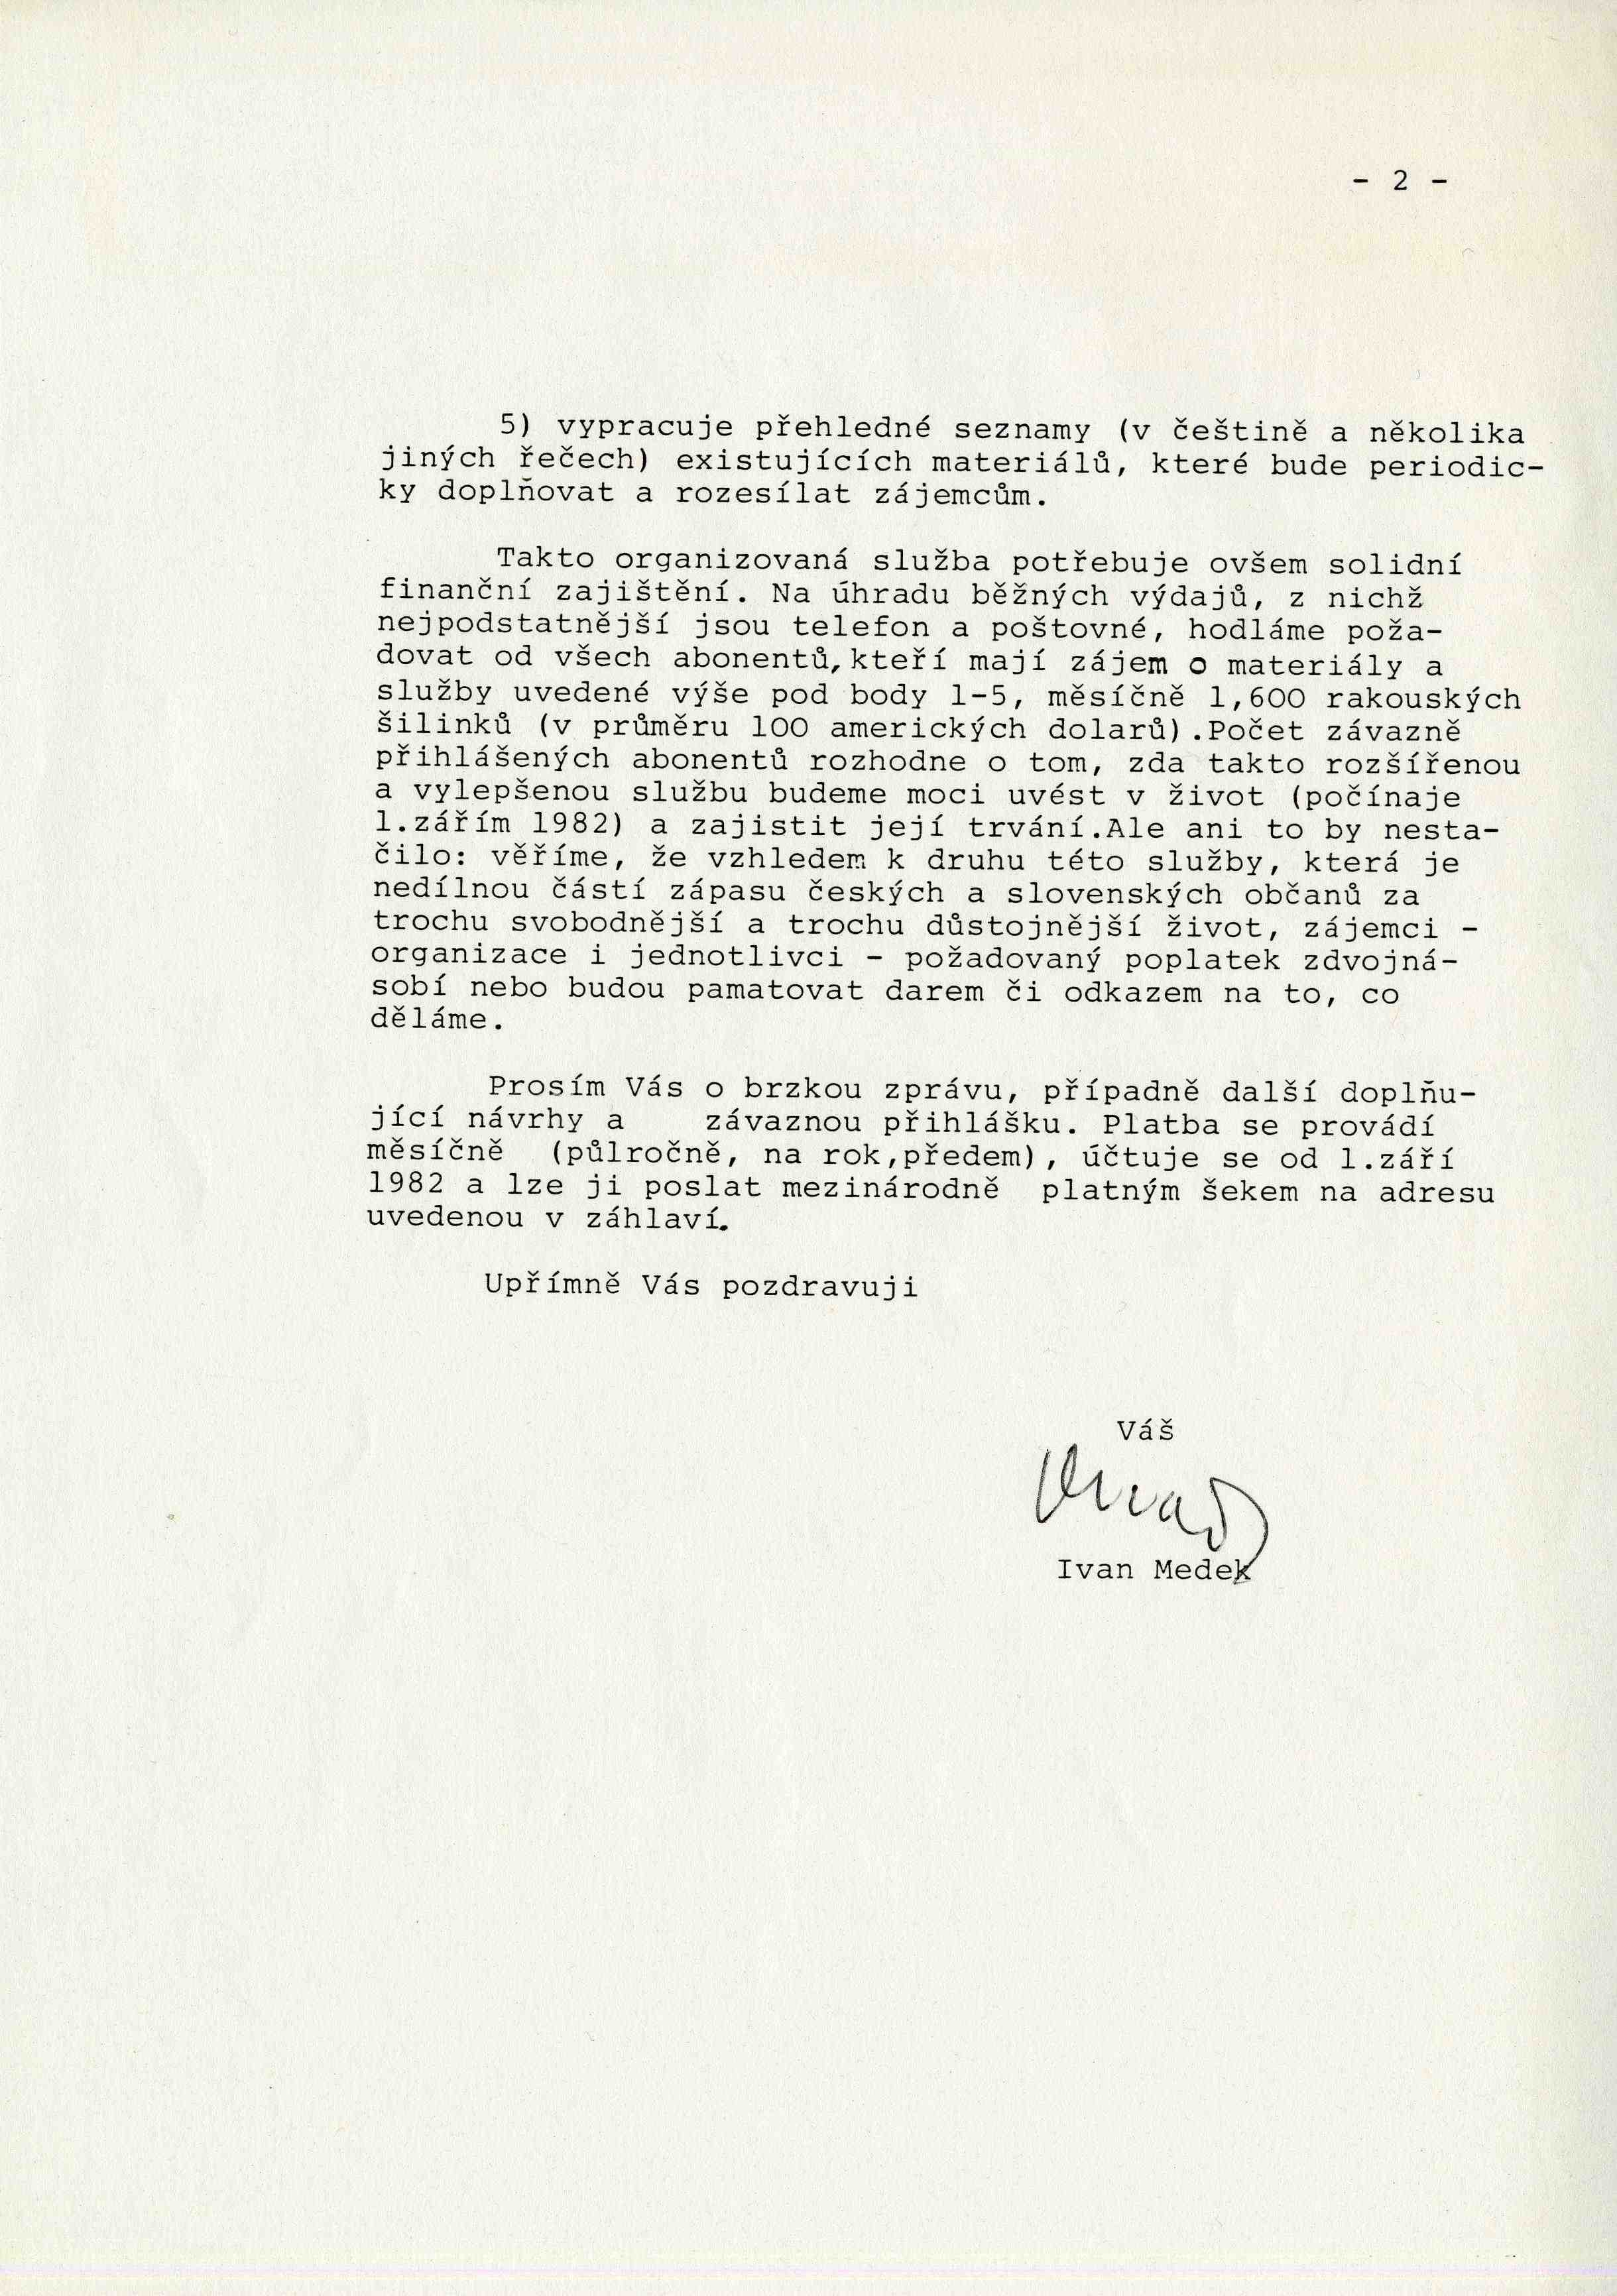 Second part of Ivan Medek Letter on founding the Press Service in 1982